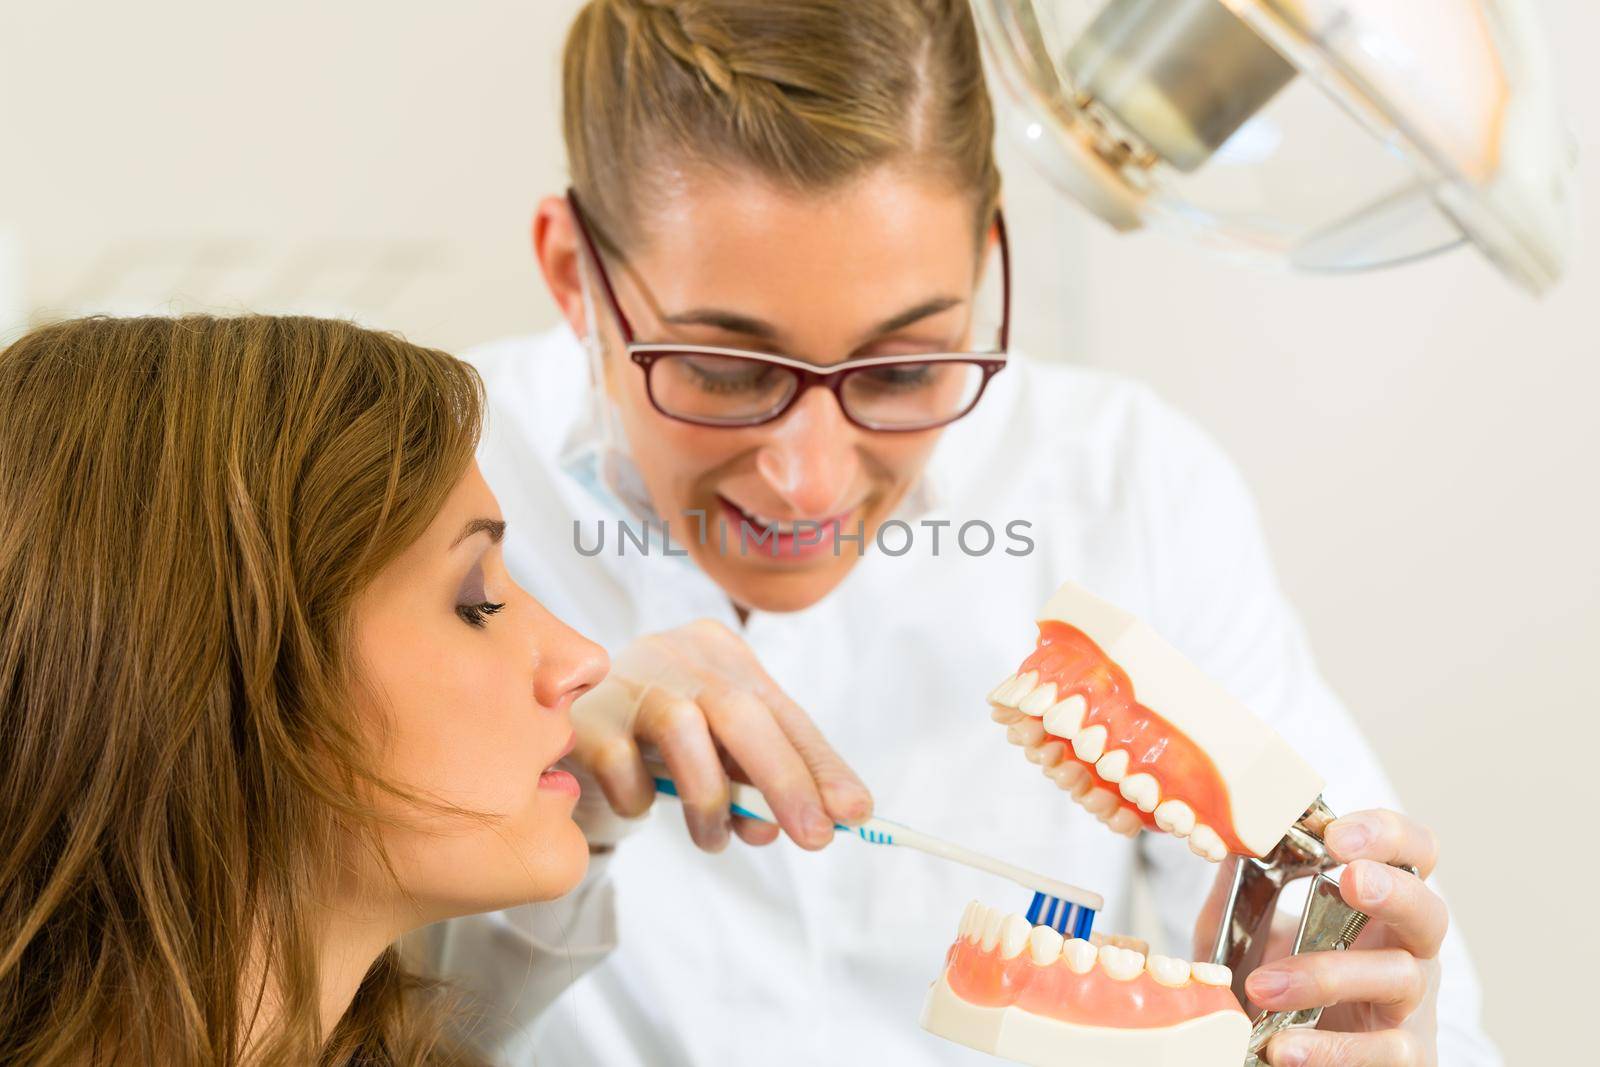 Dentist in his surgery holds a denture and explains a female patient with a toothbrush